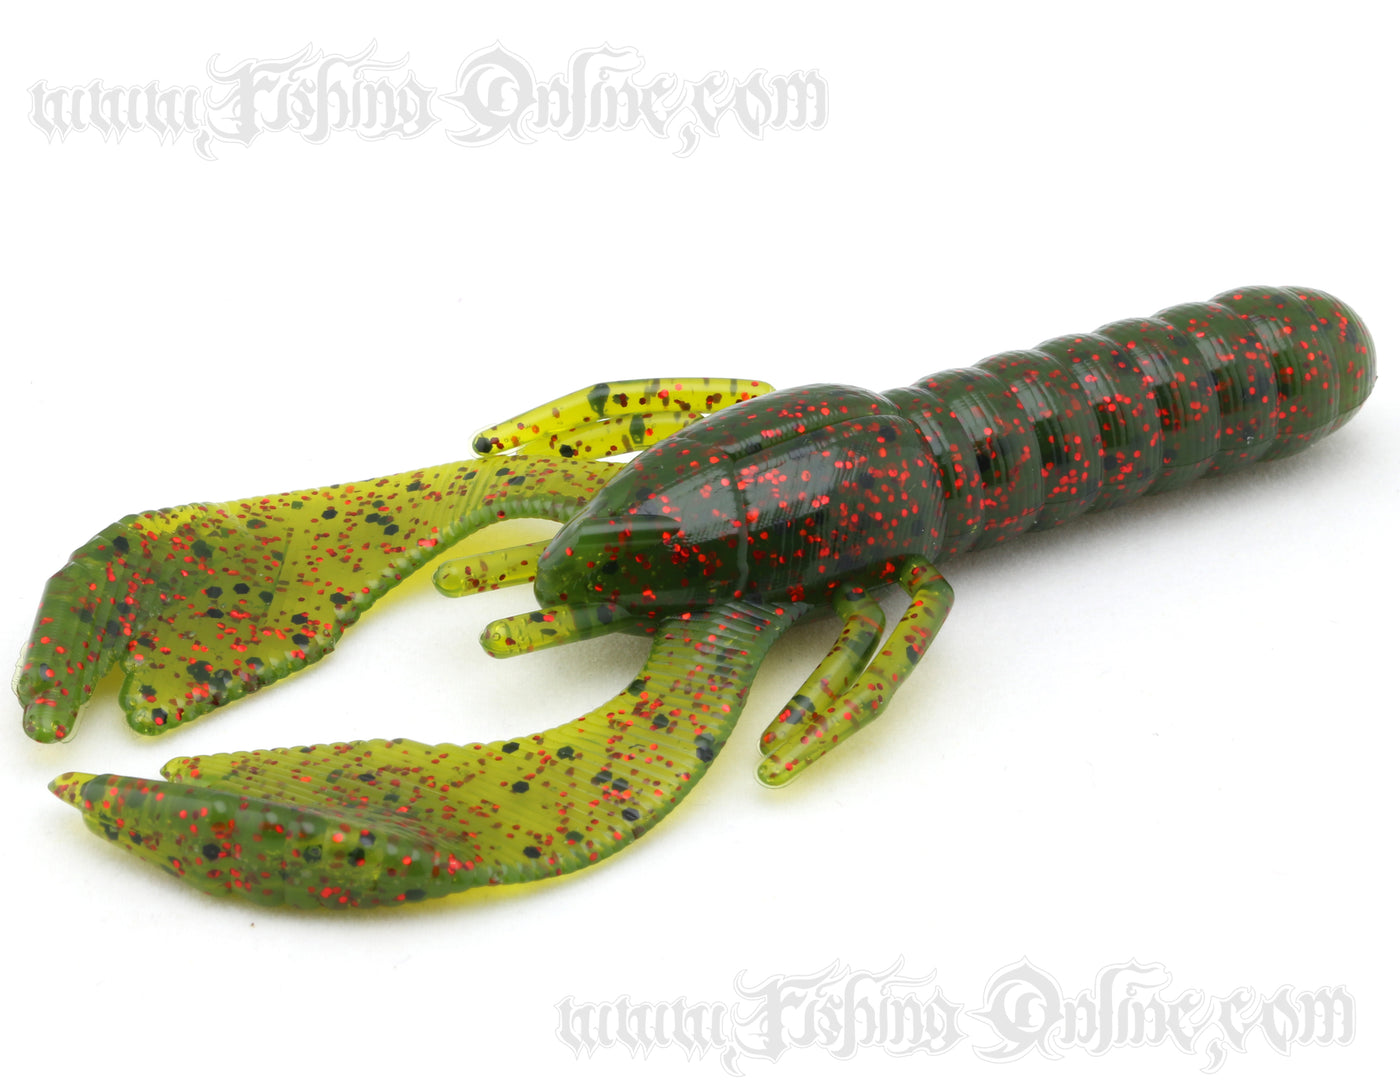 The Best Ways To Rig A Soft Plastic Crawfish For Bass, 40% OFF